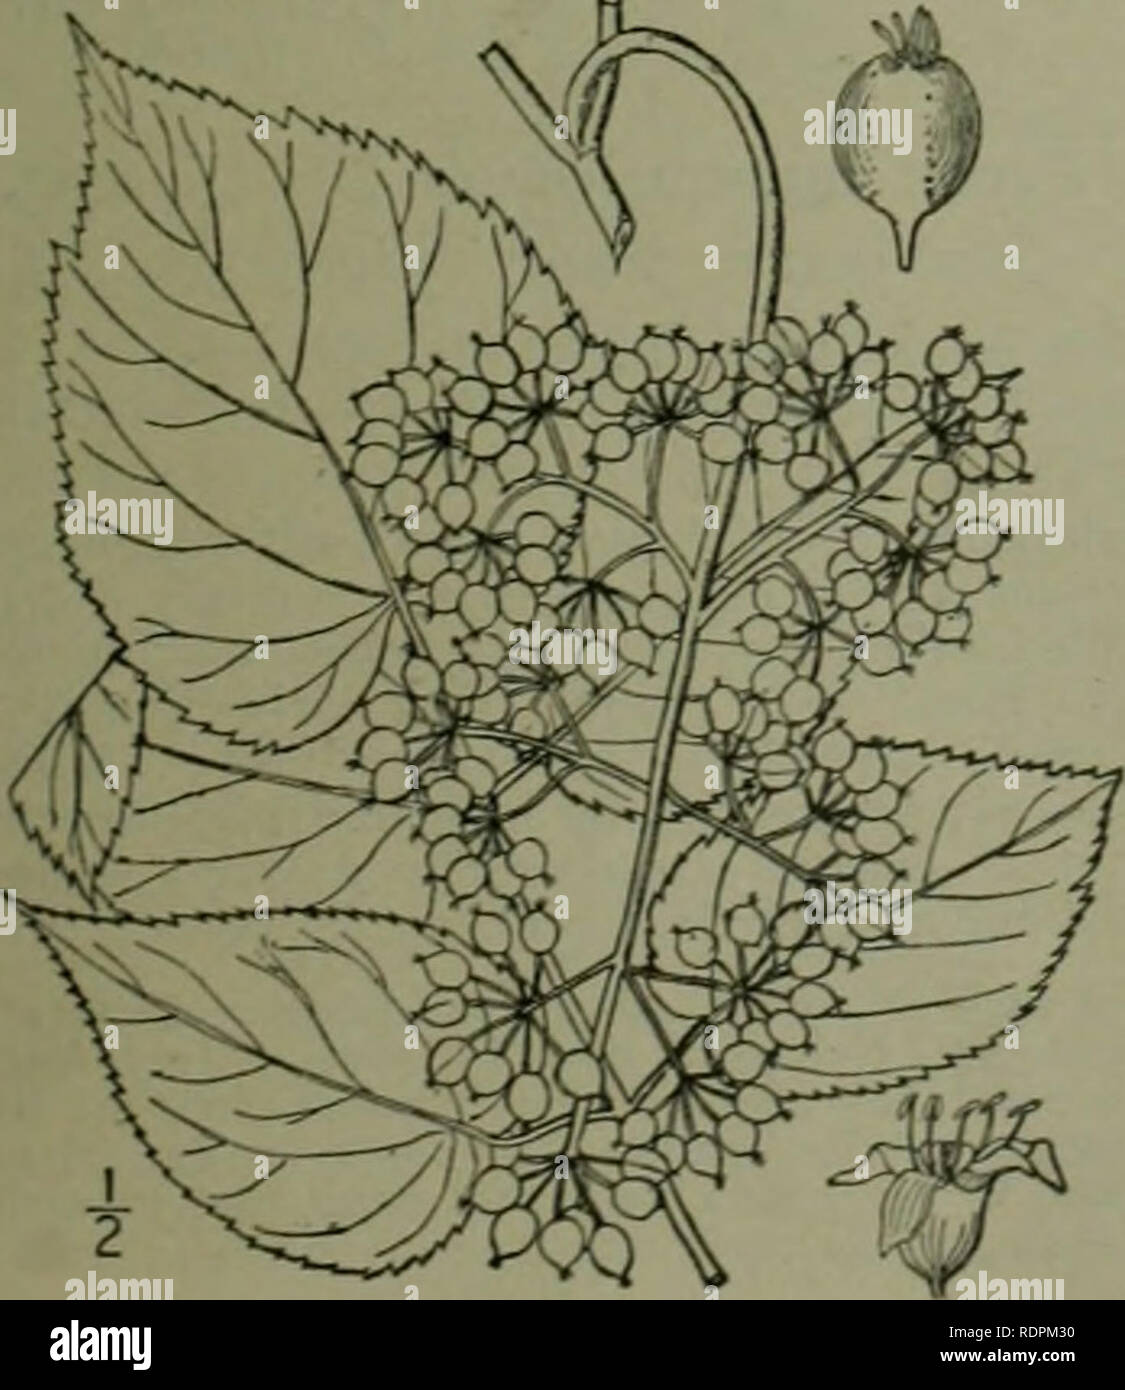 . An illustrated flora of the northern United States, Canada and the British possessions : from Newfoundland to the parallel of the southern boundary of Virginia and from the Atlantic Ocean westward to the 102nd meridian. Botany. GIXSEXG FAMILY. About 52 genera and 475 species, widely distributed in temperate and tropical regie Leaves compound. Herbs, shrubs or trees ; leaves alternate, decompound ; sty'es 5. Herbs : leaves verticillate. digitately compound ; styles 2-3. Leaves palniately lobed ; styles 2. 1. Aralia. 2, Panax. J. Echinopan I. ARALIA [Tourn.] L. Sp. PL 273. 1753. Perennial herb Stock Photo